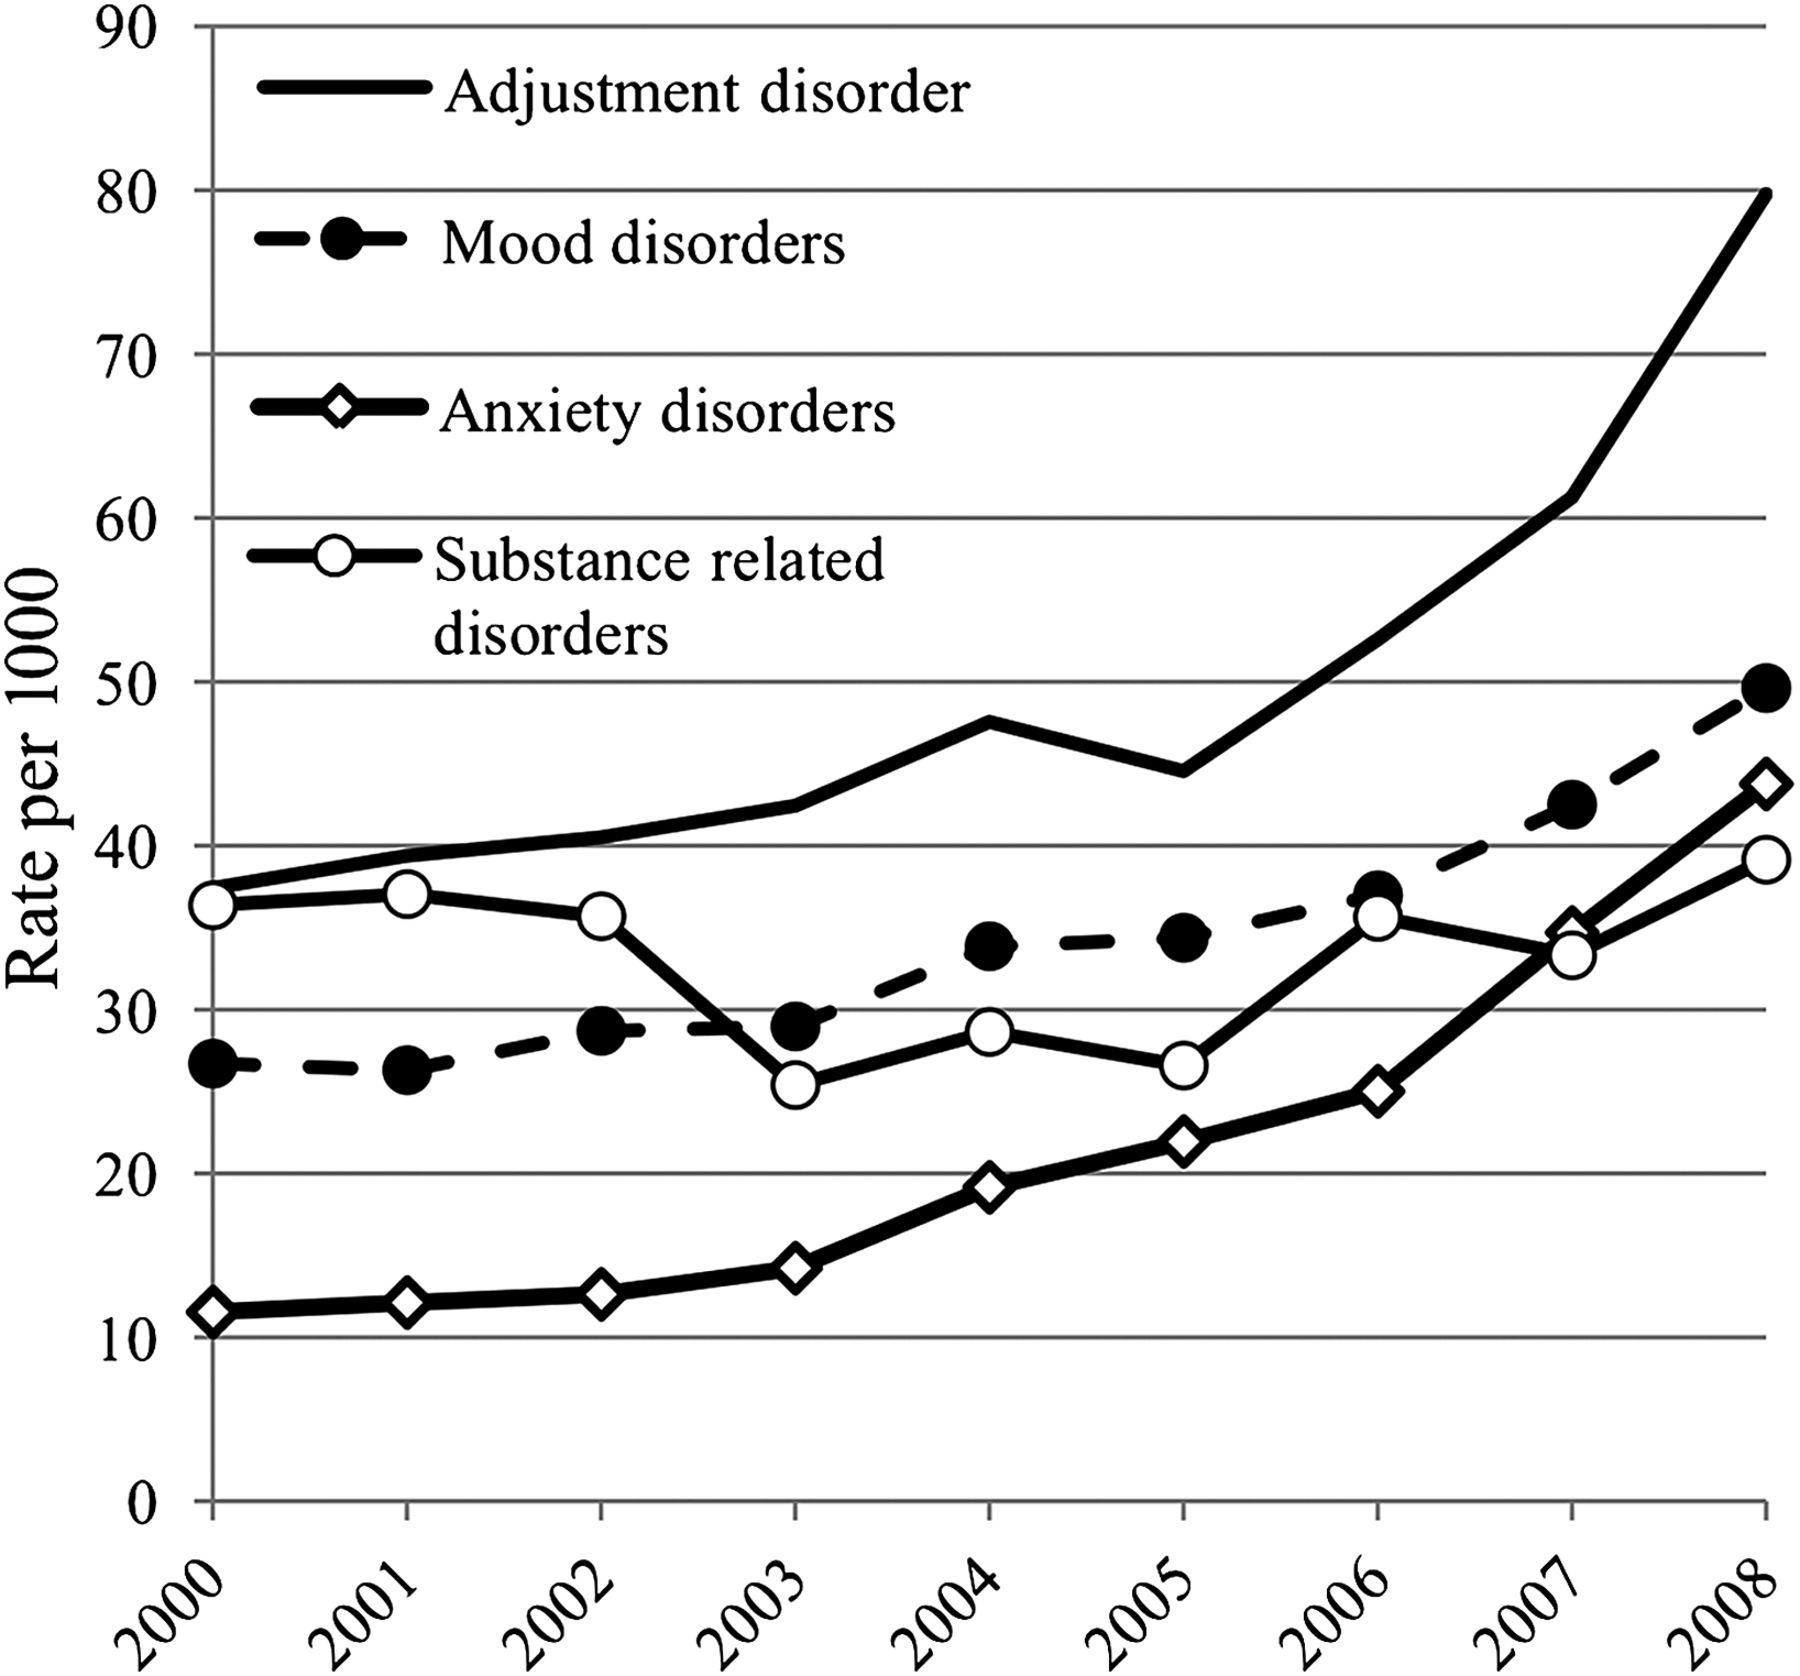 US Army rates of mental health disorders.